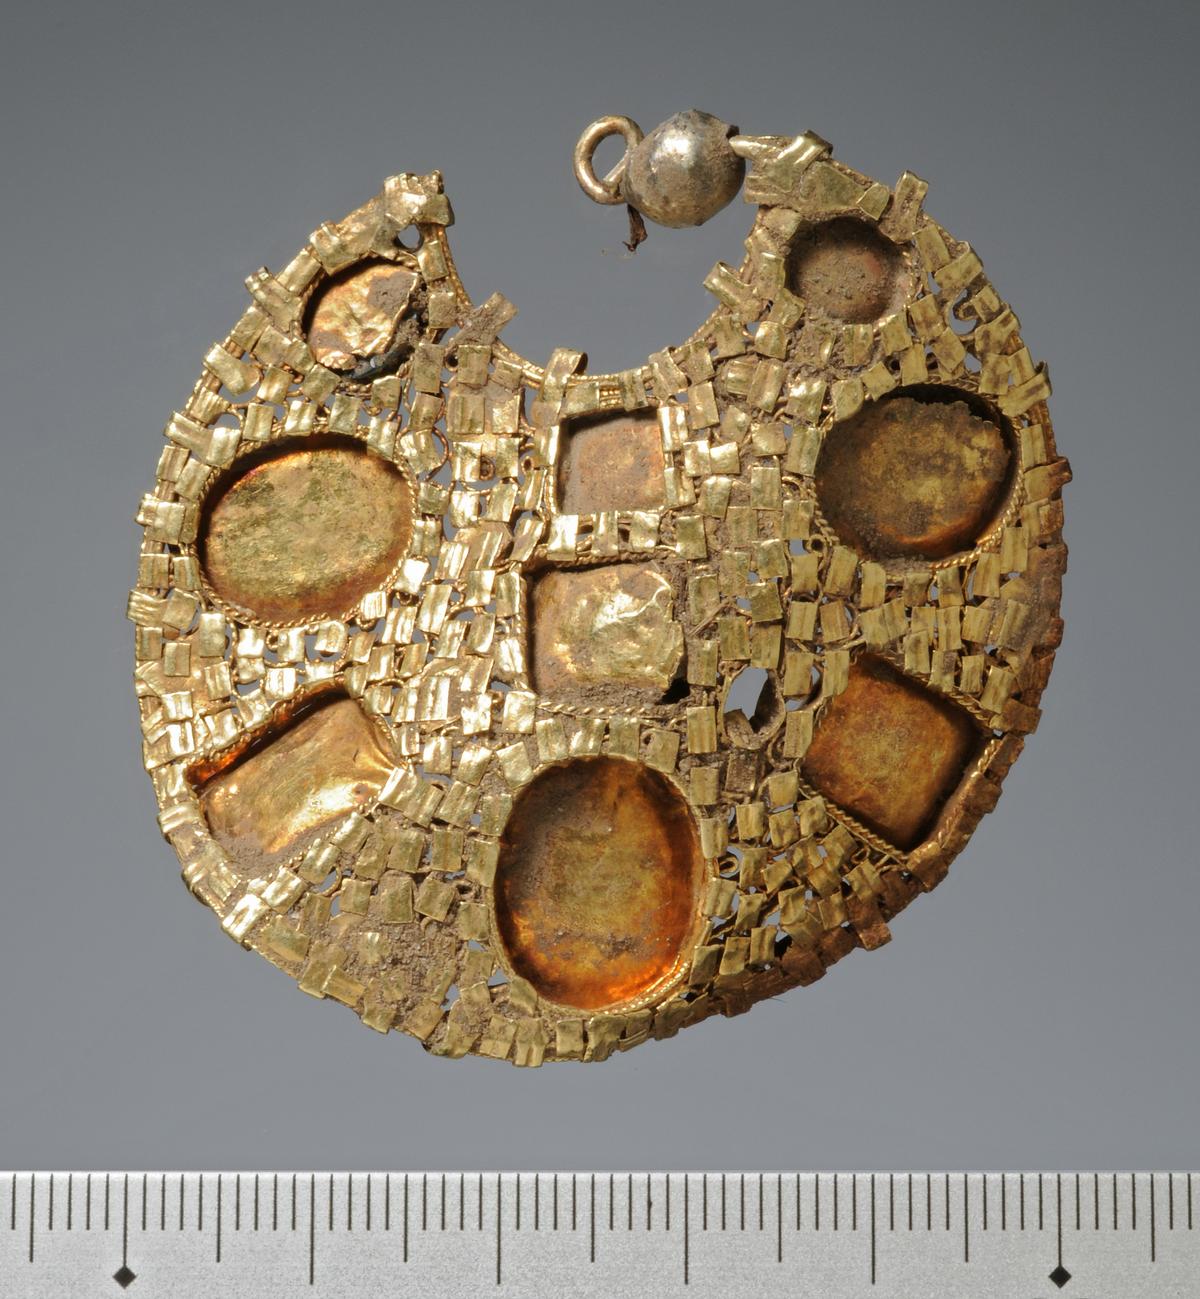 A view from the back of one of the golden ear pendants. (Courtesy of <a href="http://www.schleswig-holstein.de/">ALSH</a>)